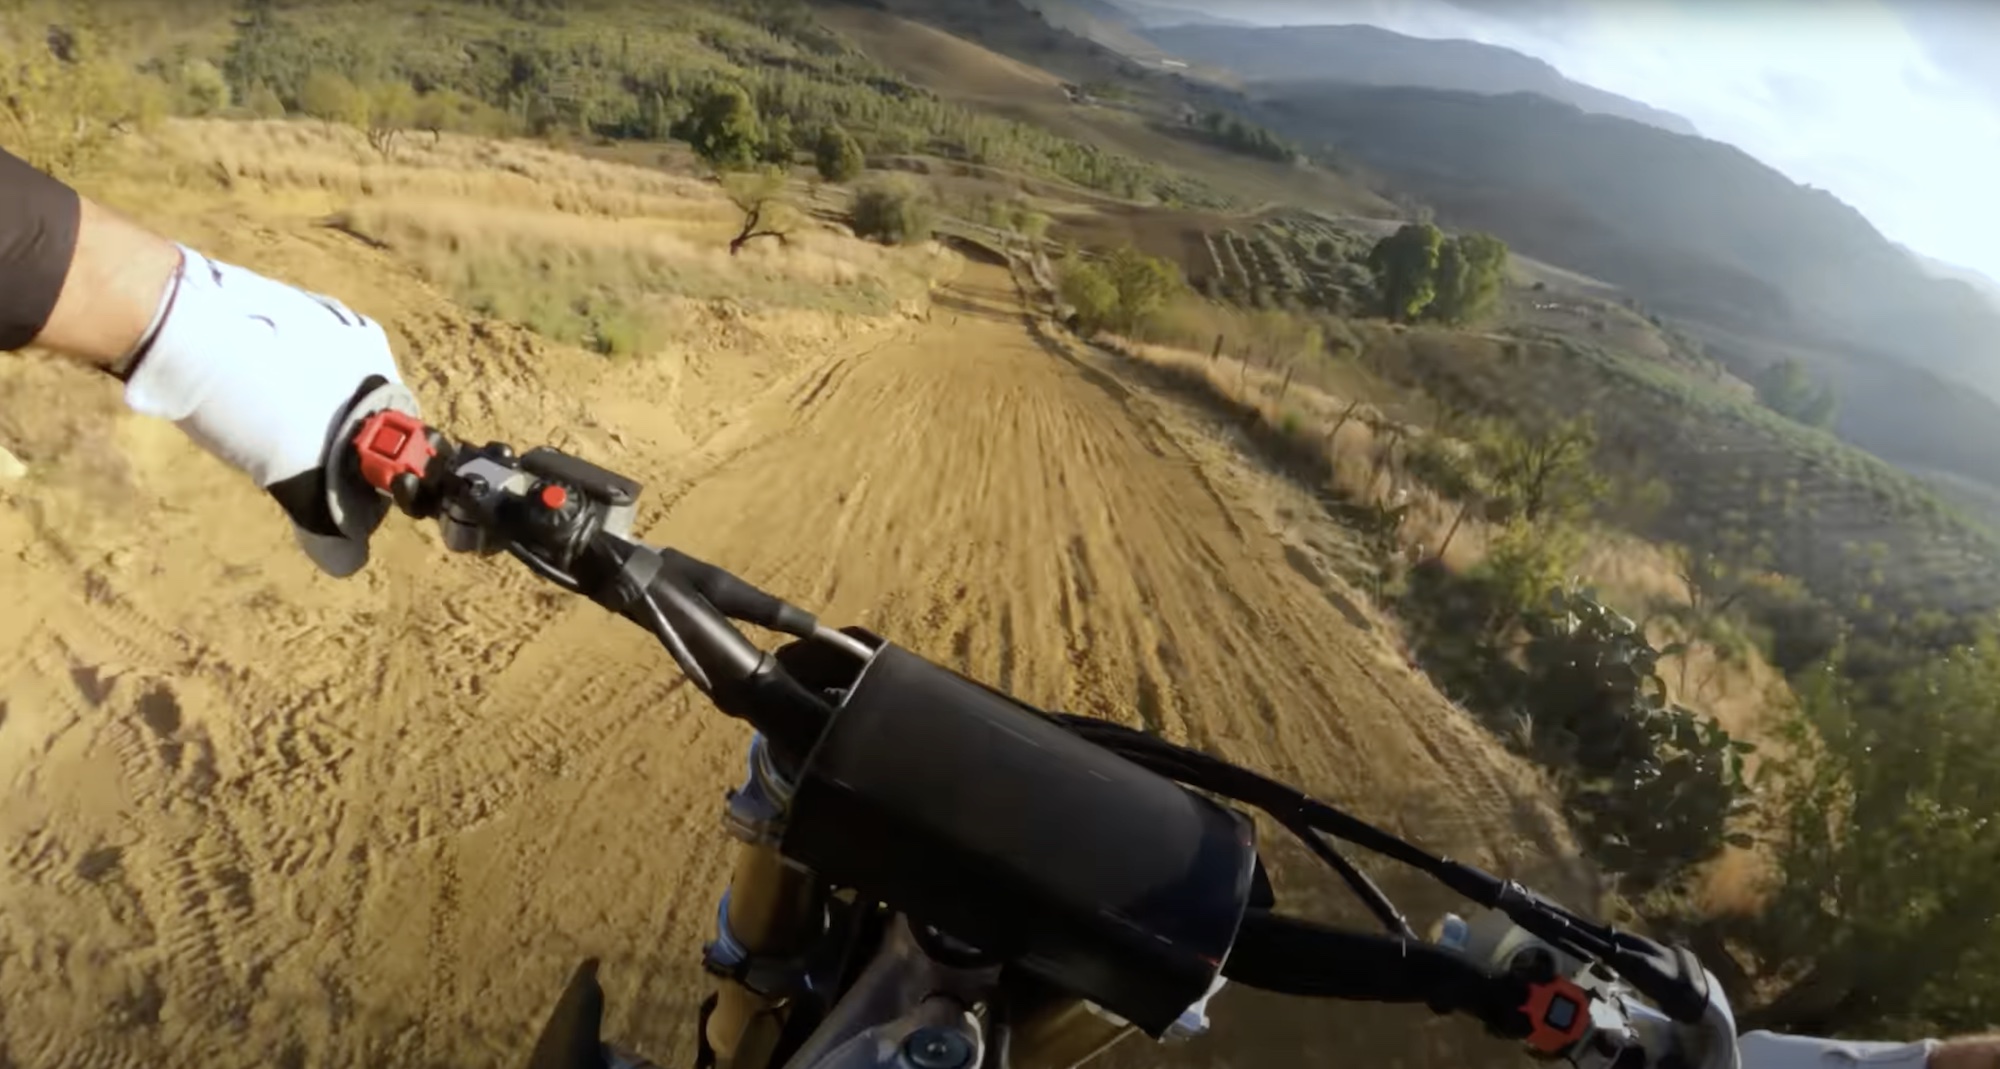 A view of a motocross motorcycle from behind the handlebars.